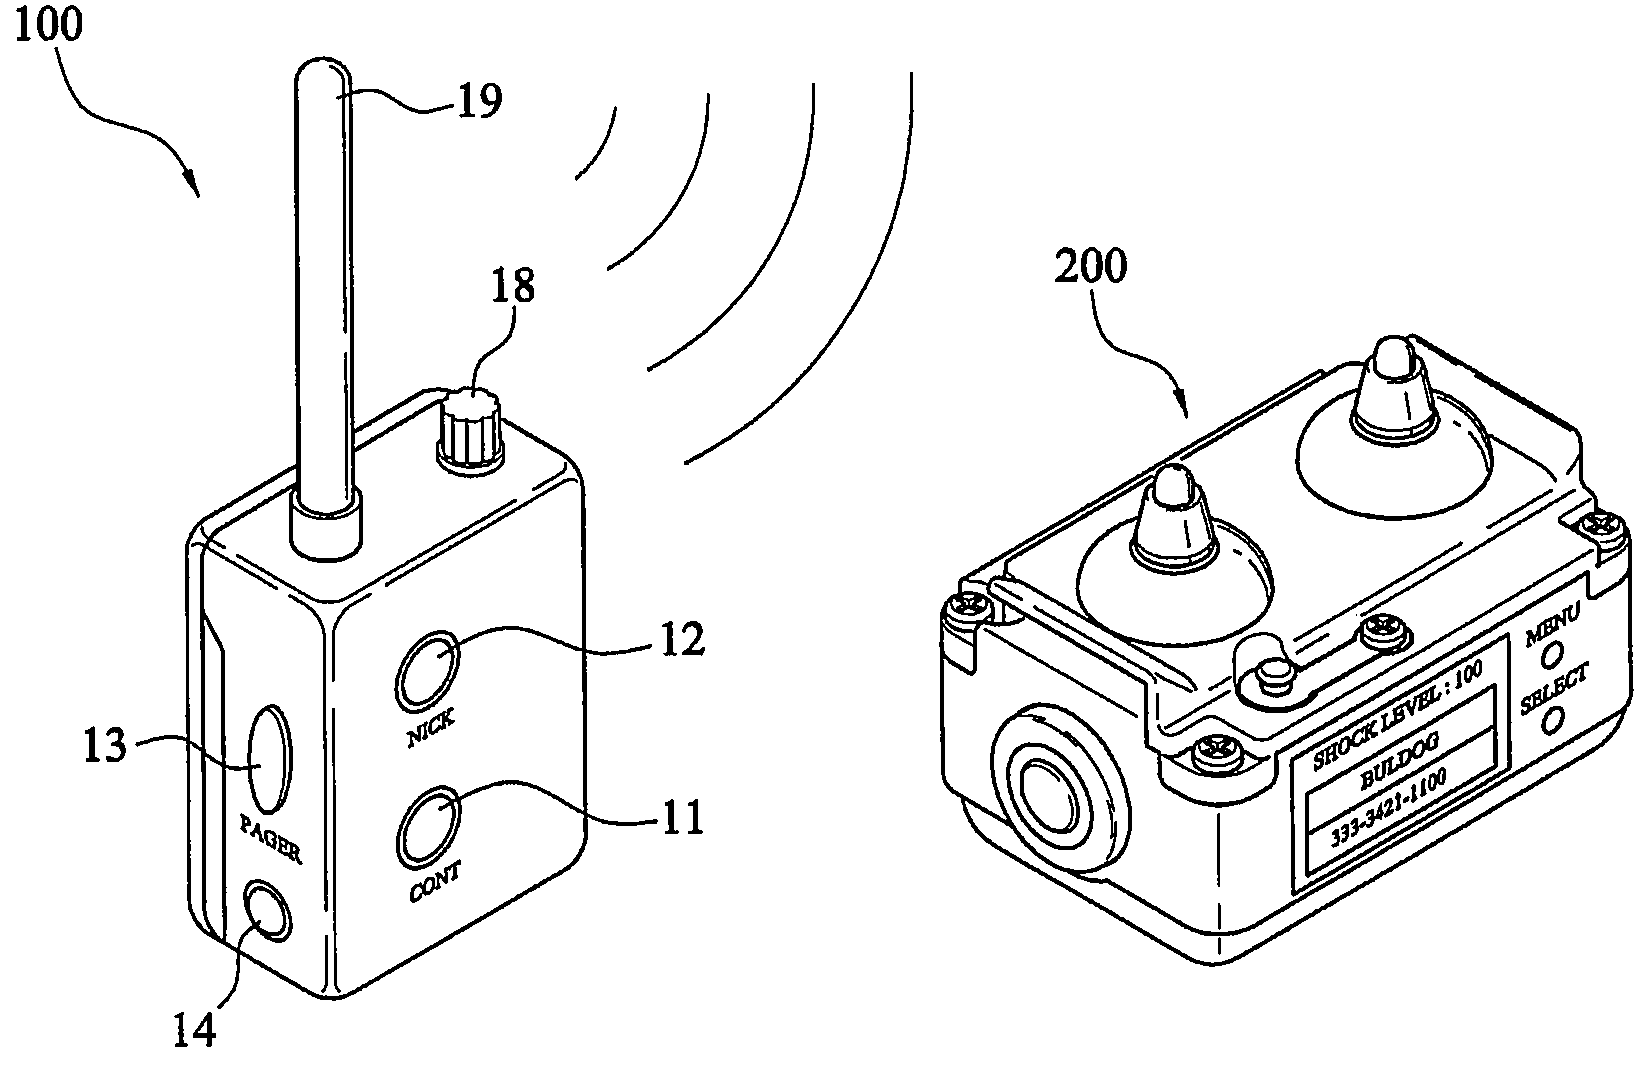 Vibration touch button-type animal training device and method of controlling the same